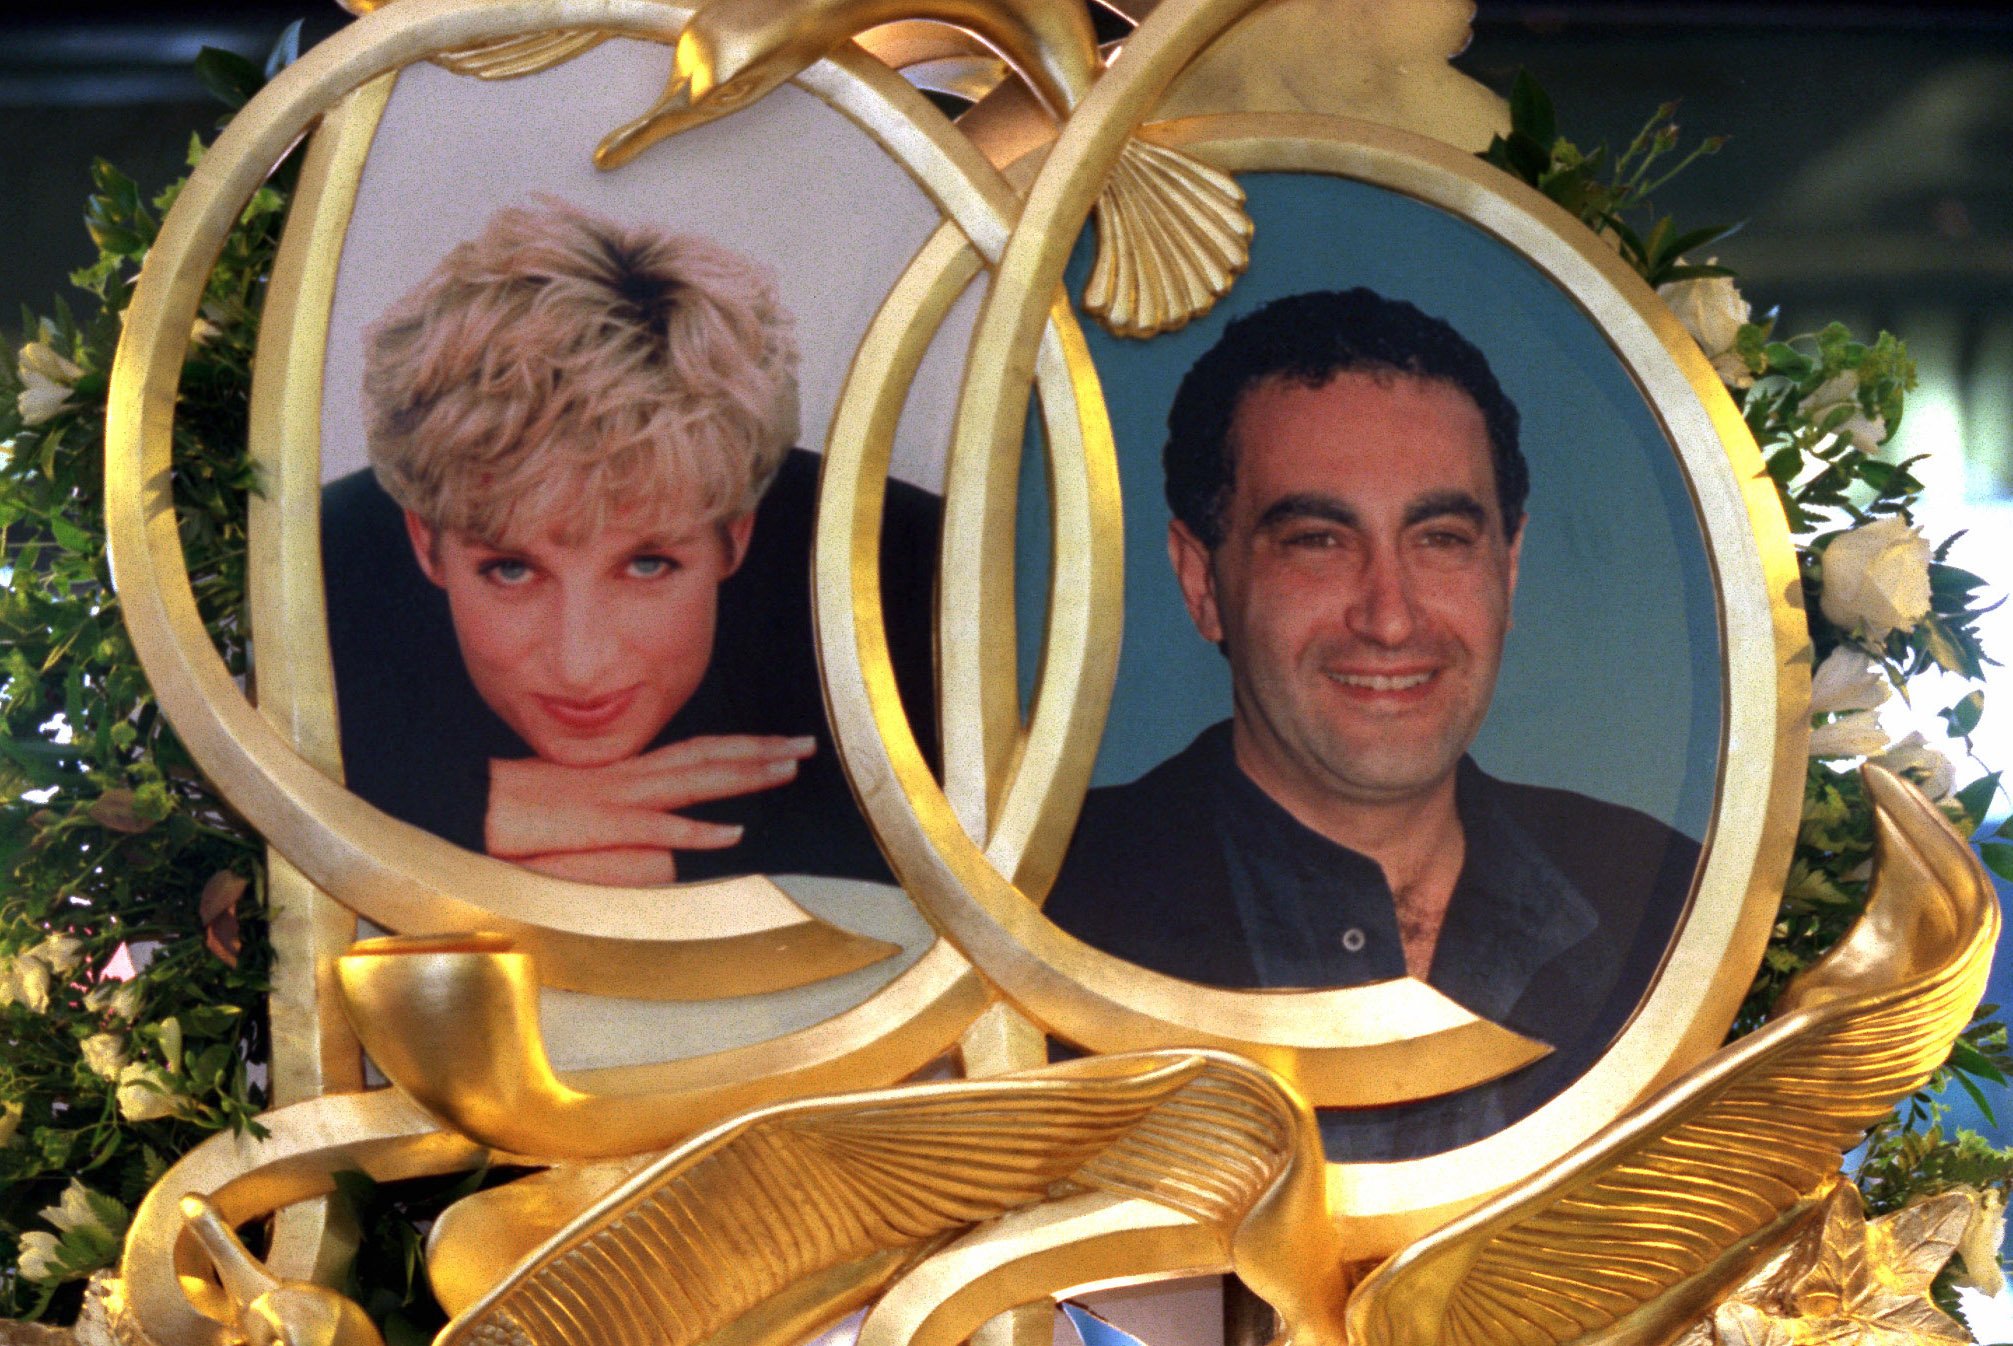 Photos of Princess Diana and Dodi Fayed incorporated into the work exhibited at Harrods. / Source: Getty Images